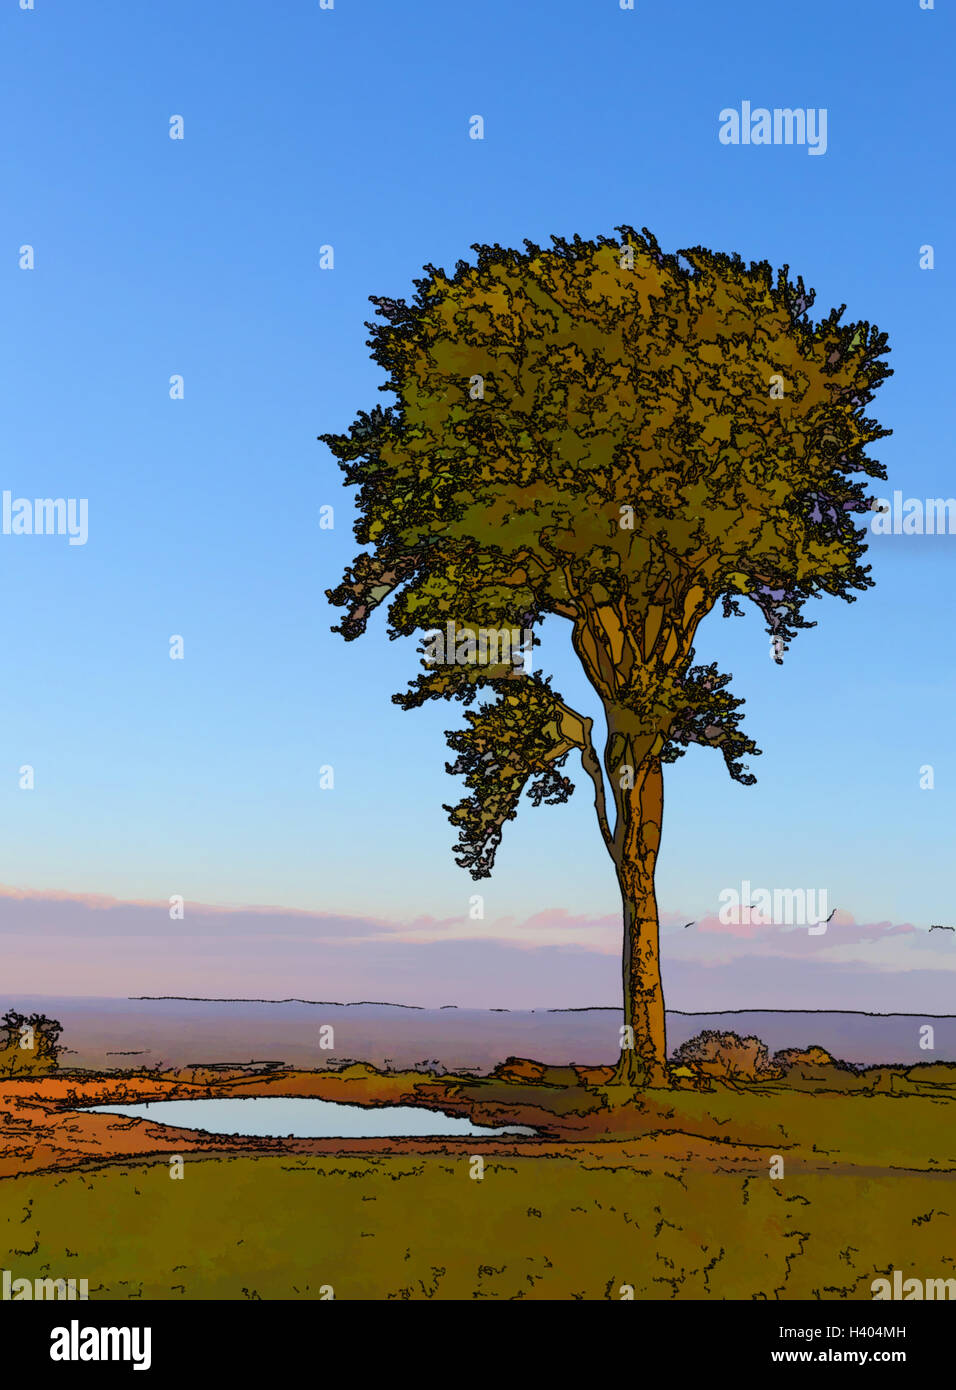 Single beech tree by a small pond against blue sky illustration Stock Photo